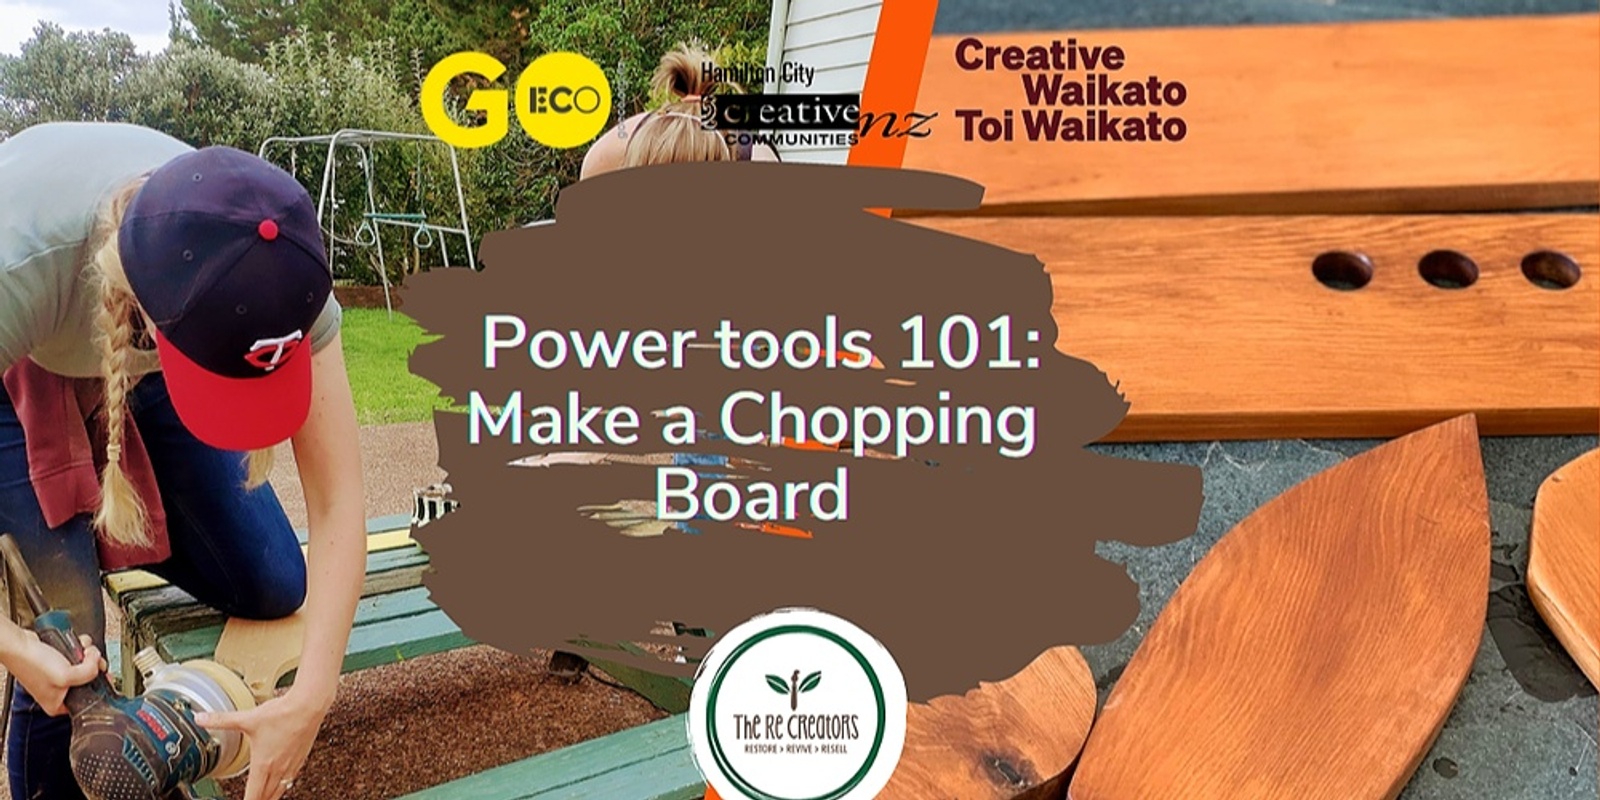 Banner image for Power tools 101: Make a Chopping Board, Go Eco, Saturday 25 February 10.00 am-1.00 pm